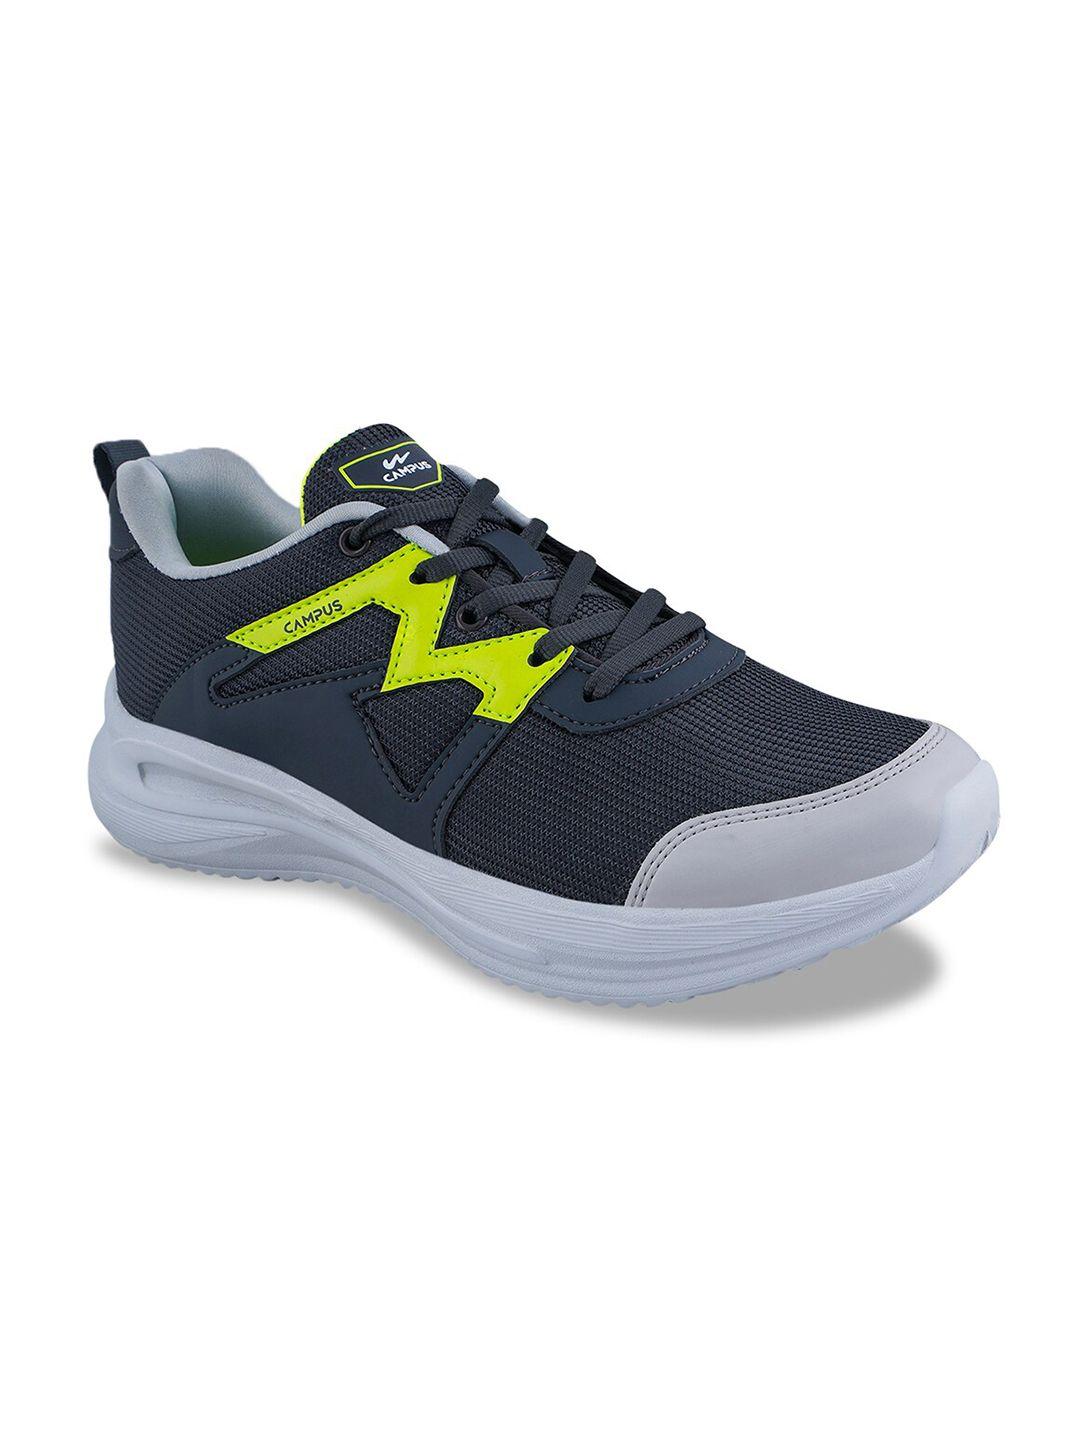 campus slot men mesh running breathability shoes